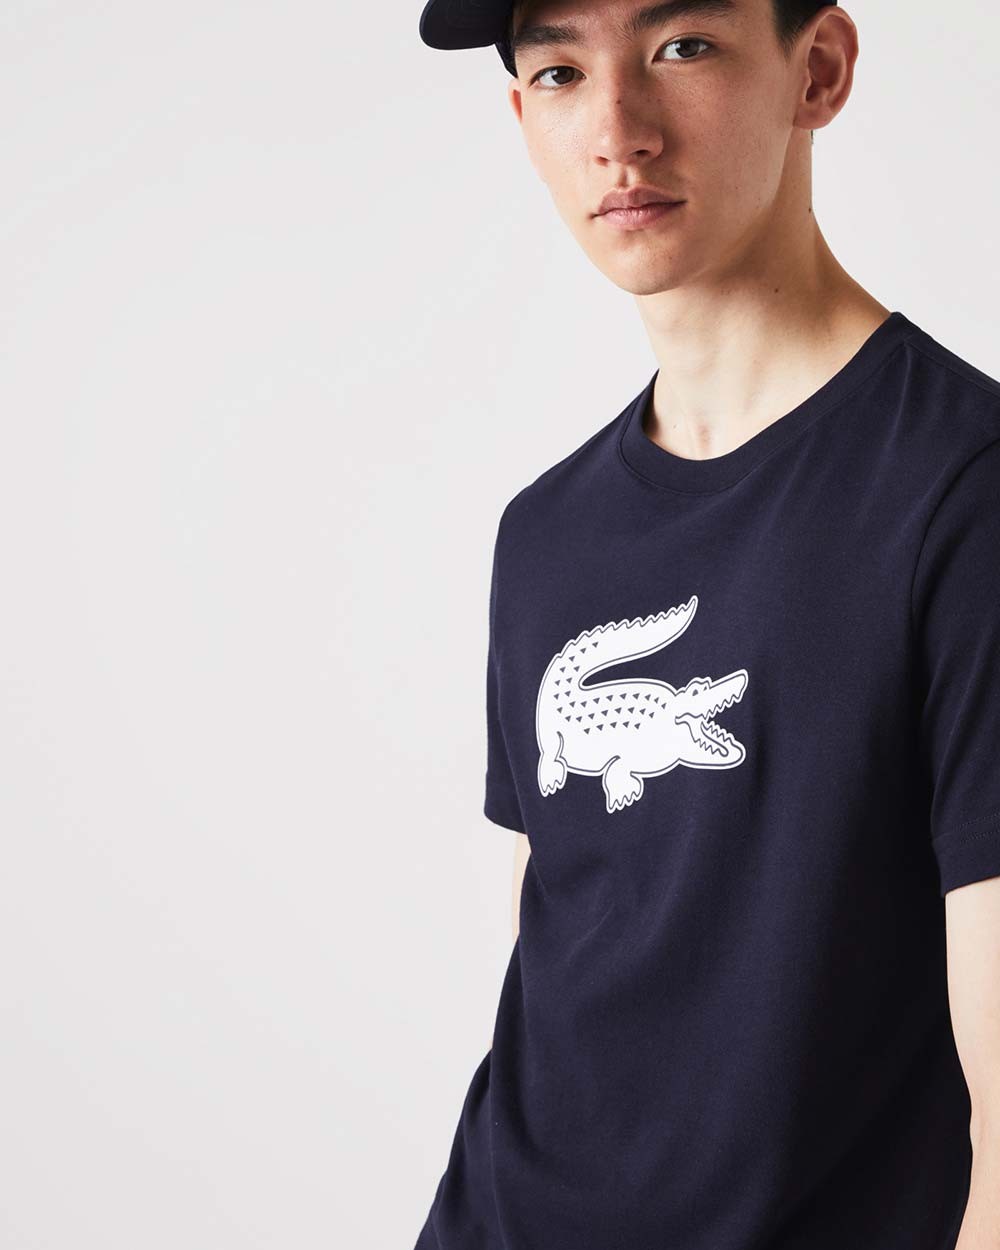 LACOSTE TH2042-00 - T-shirt